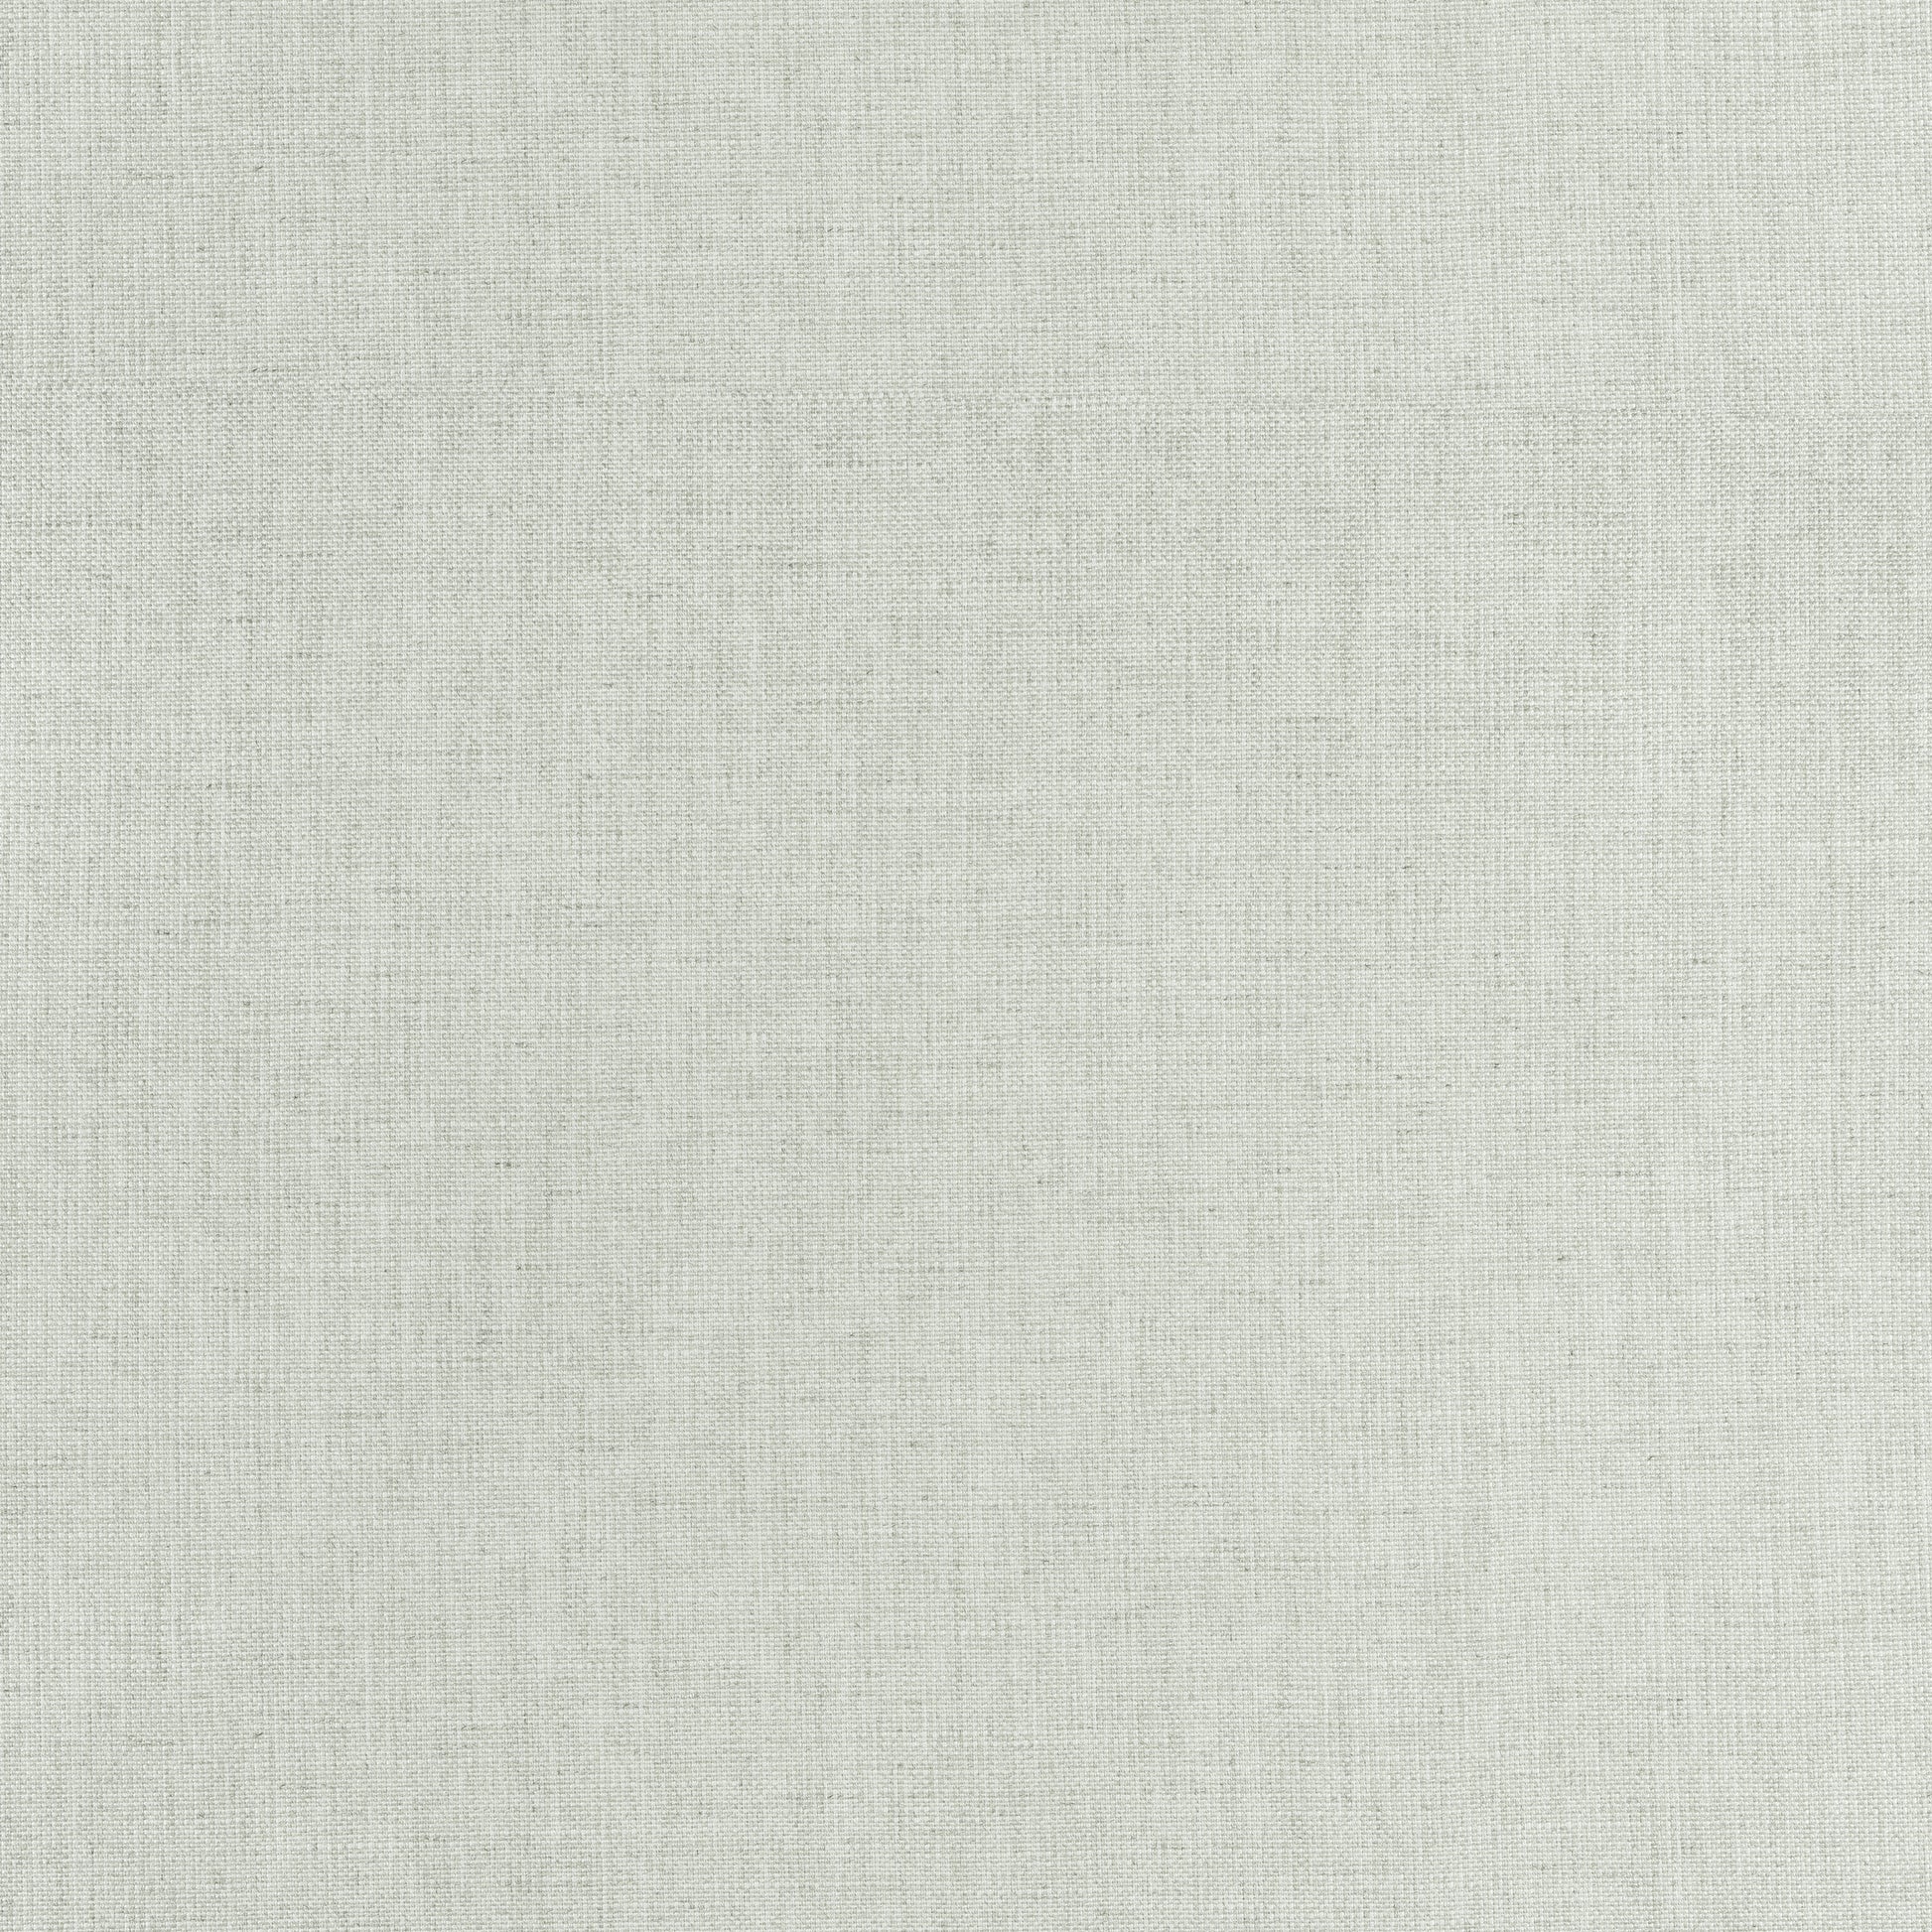 Purchase Thibaut Fabric Product W75207 pattern name Ambient color Seafoam